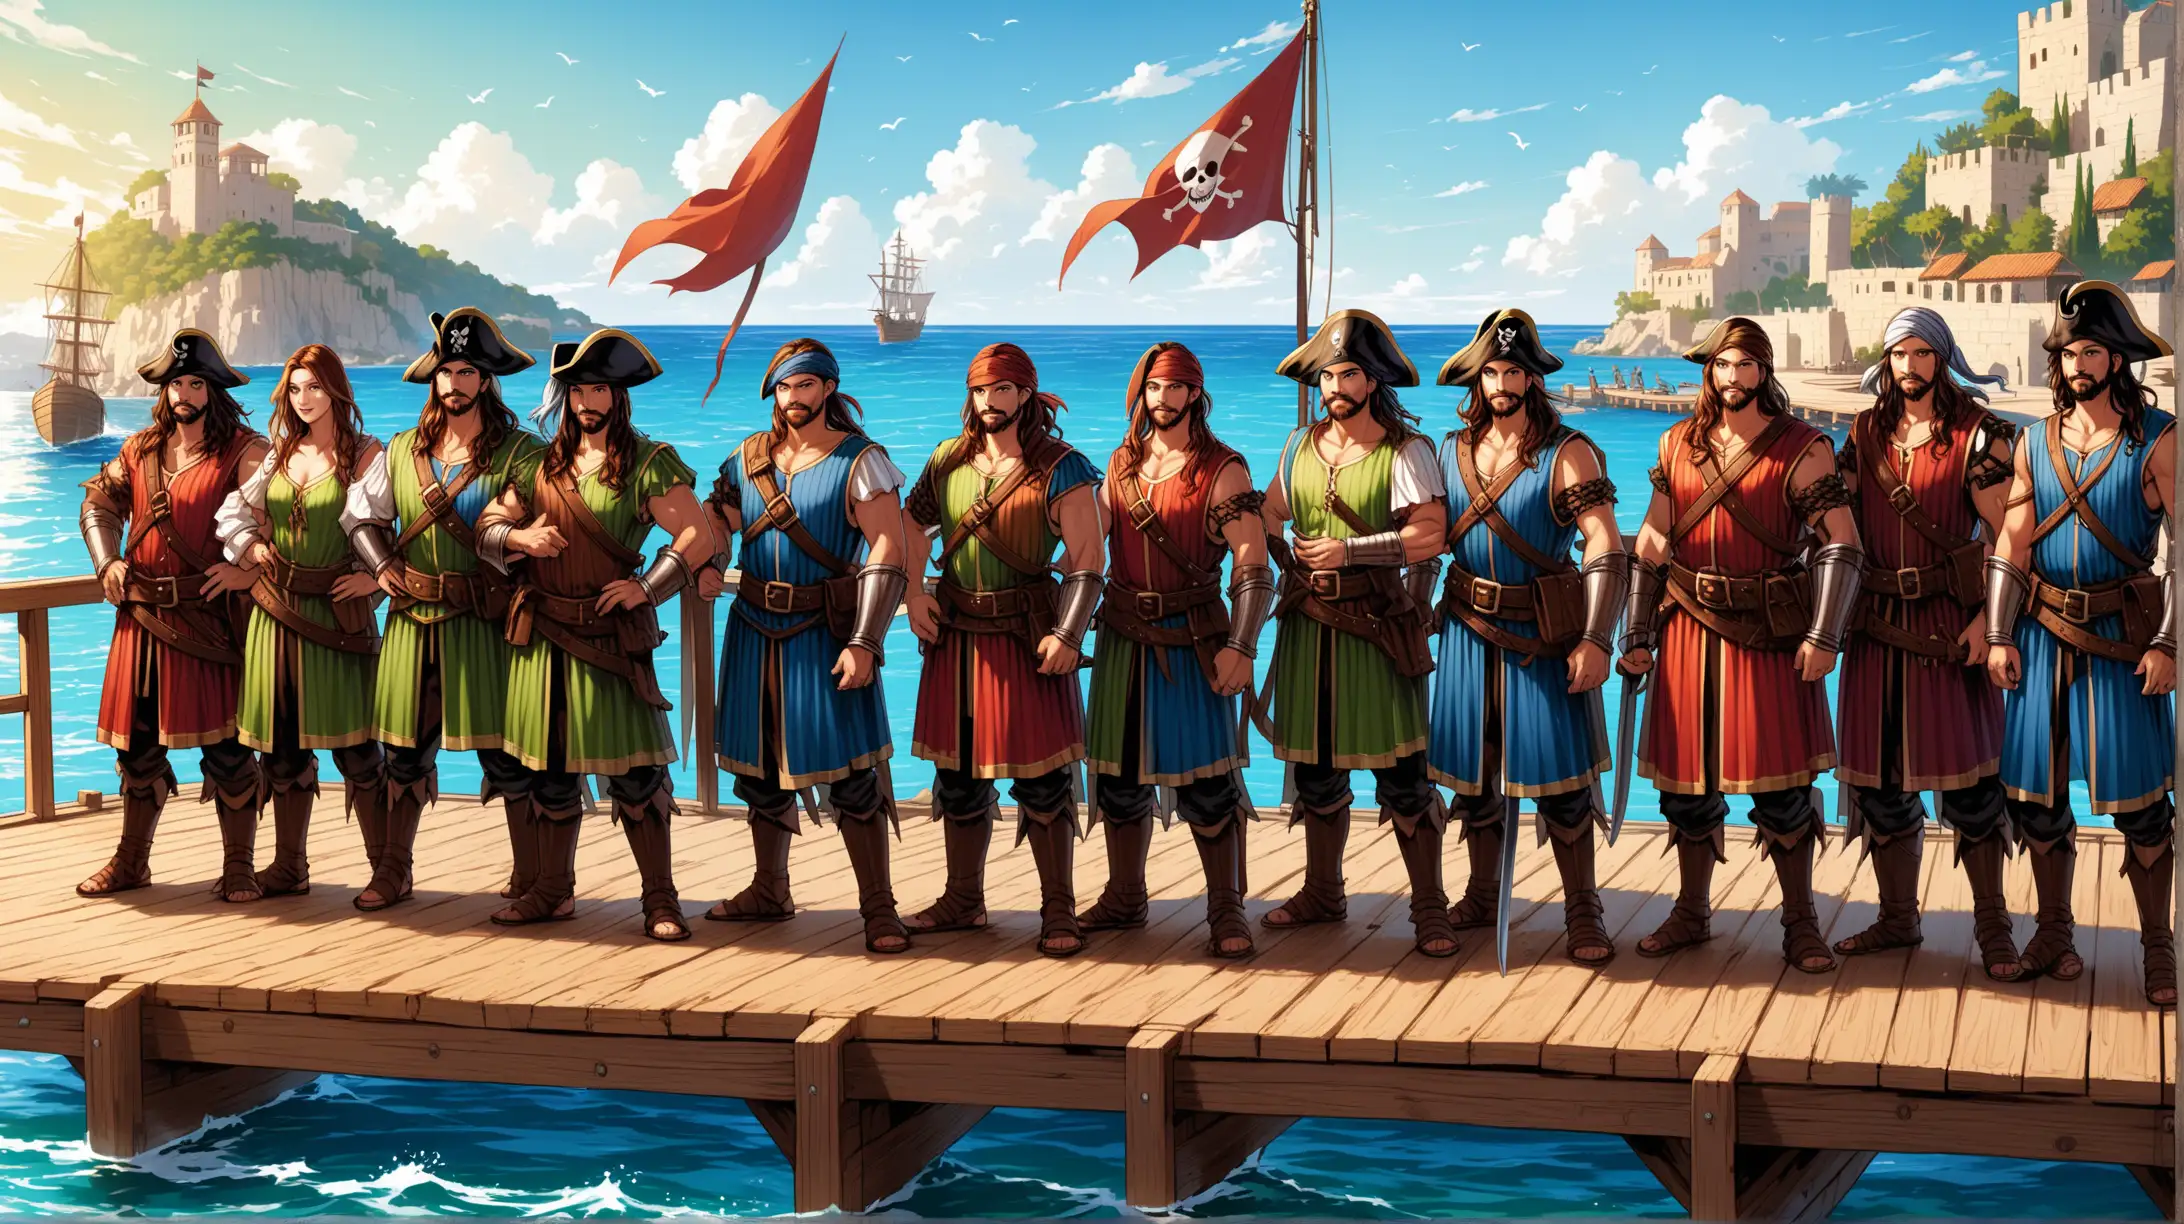 Mediterranean Wooden Dock Gathering of Pirates Gladiators and Wizards in Medieval Fantasy